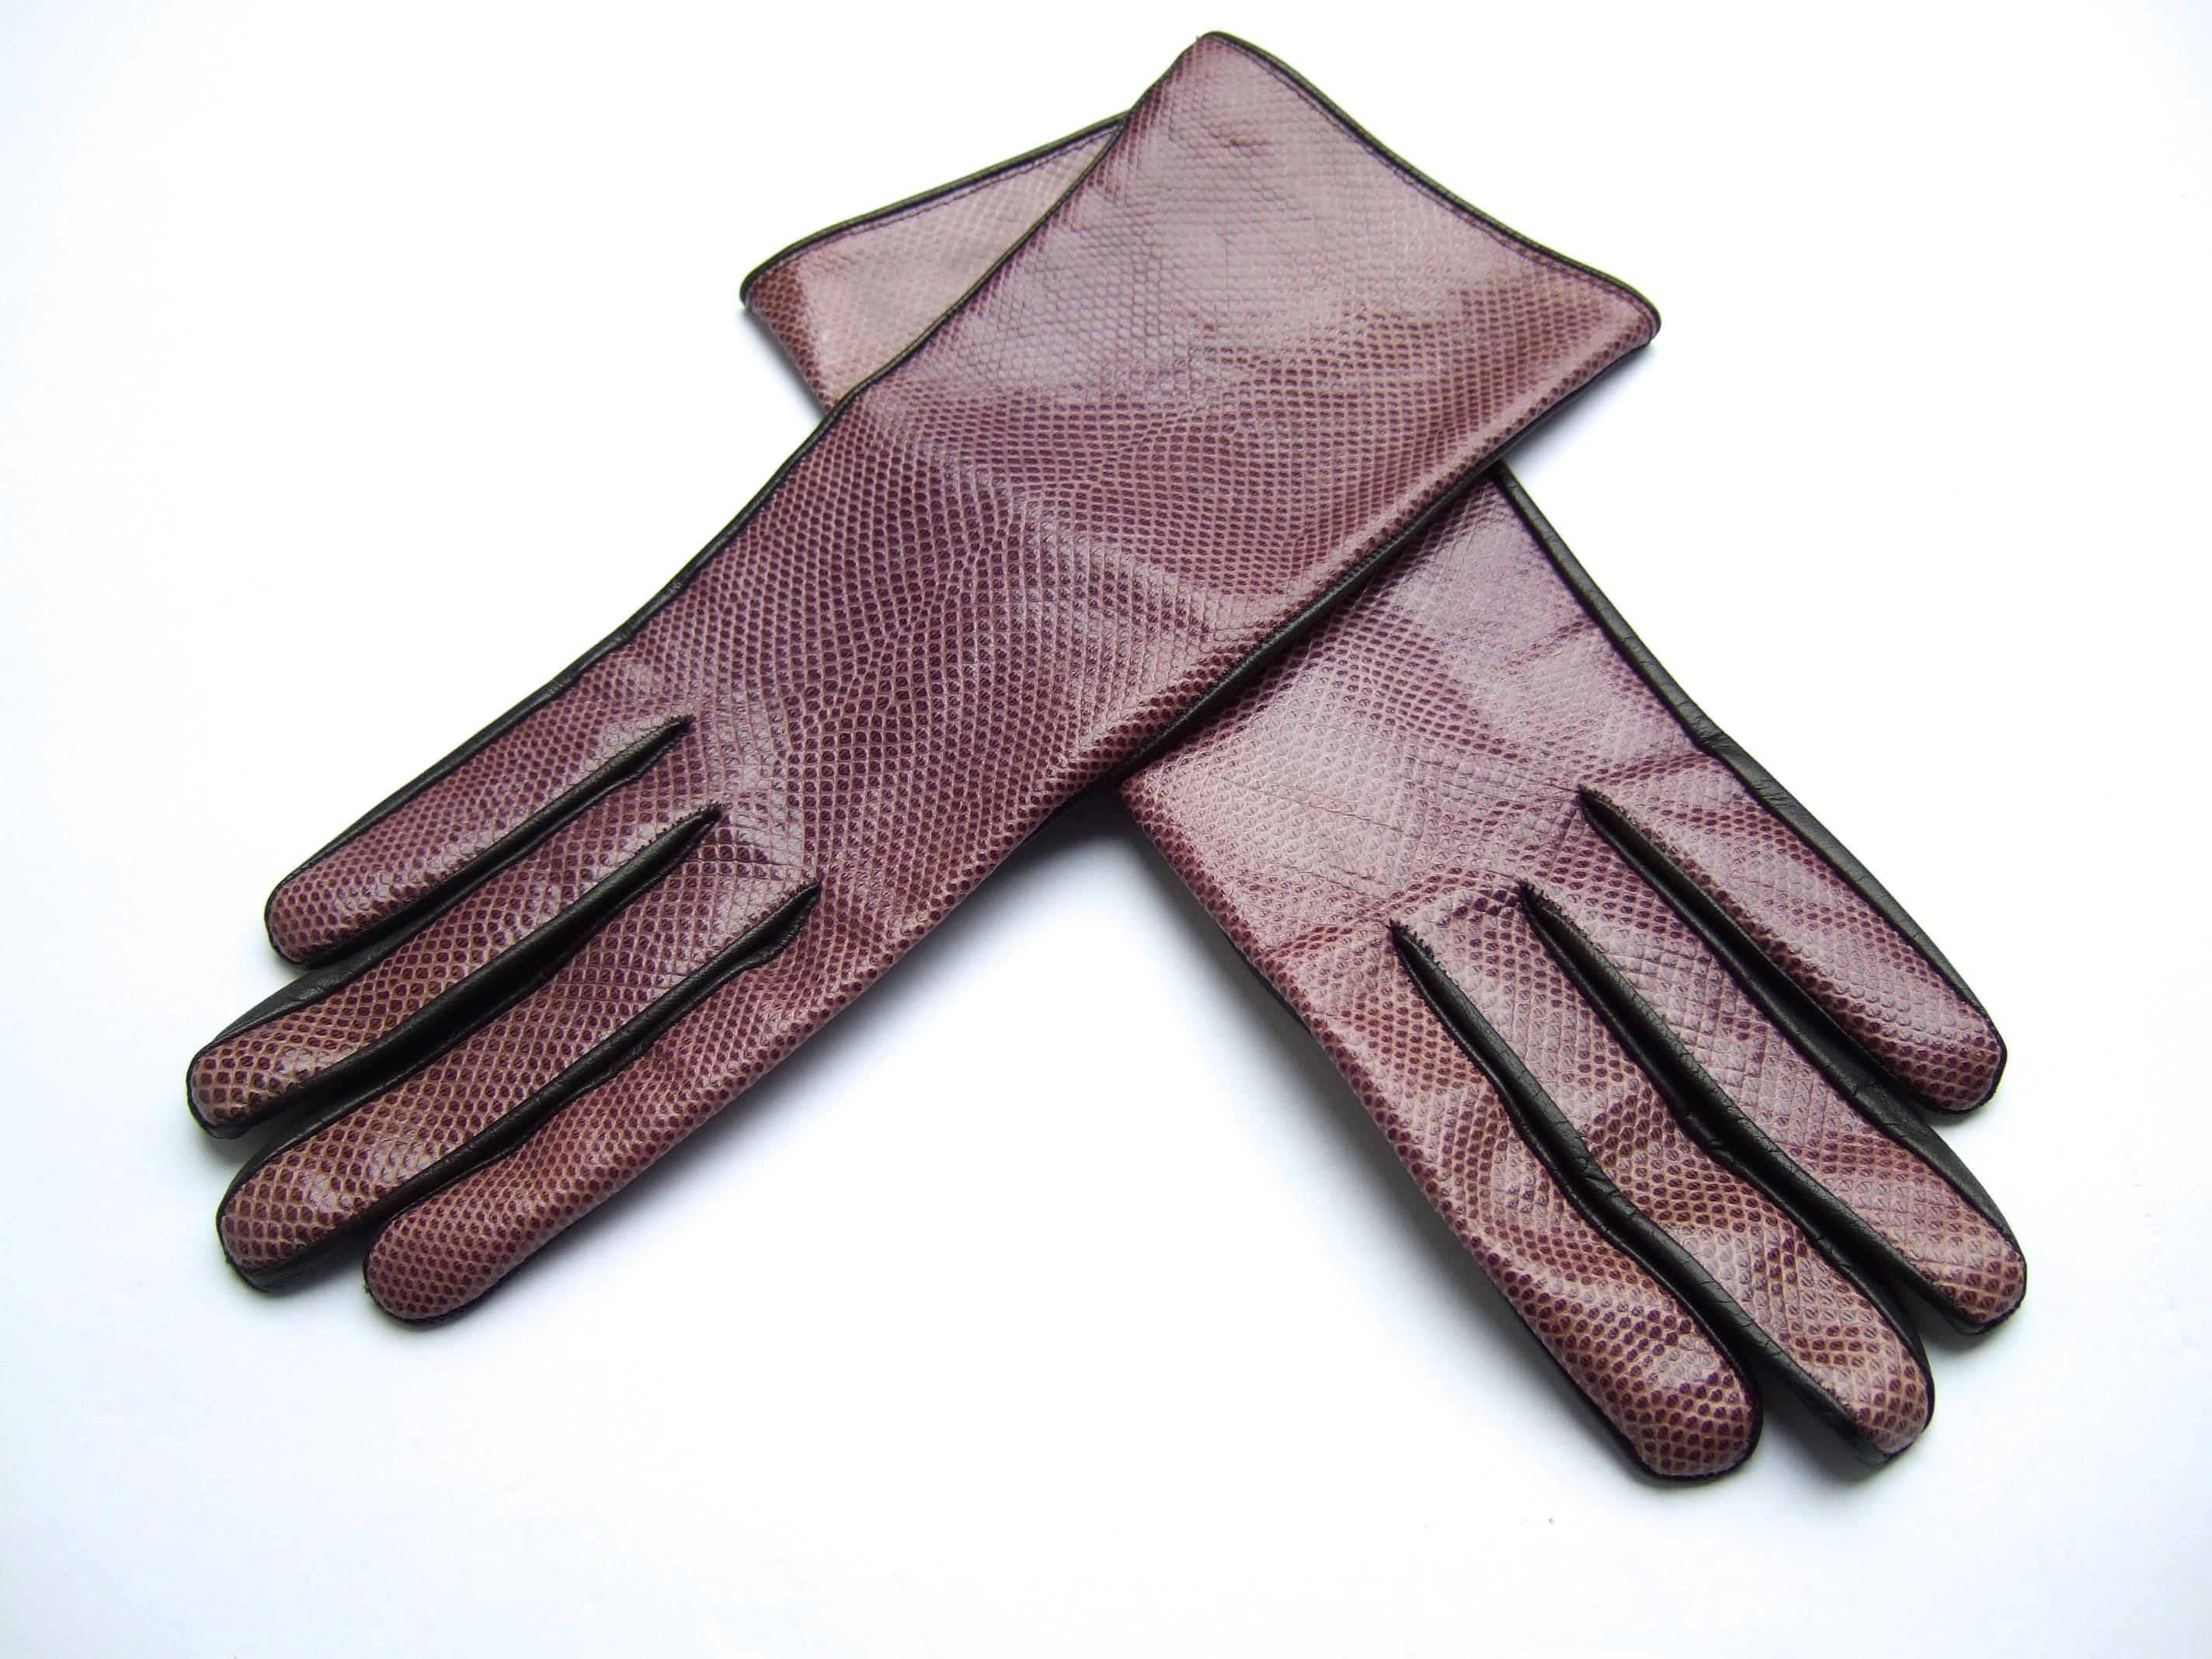 Yves Saint Laurent Chic Embossed Purple Leather Gloves Size 7 c 1980s For Sale 1